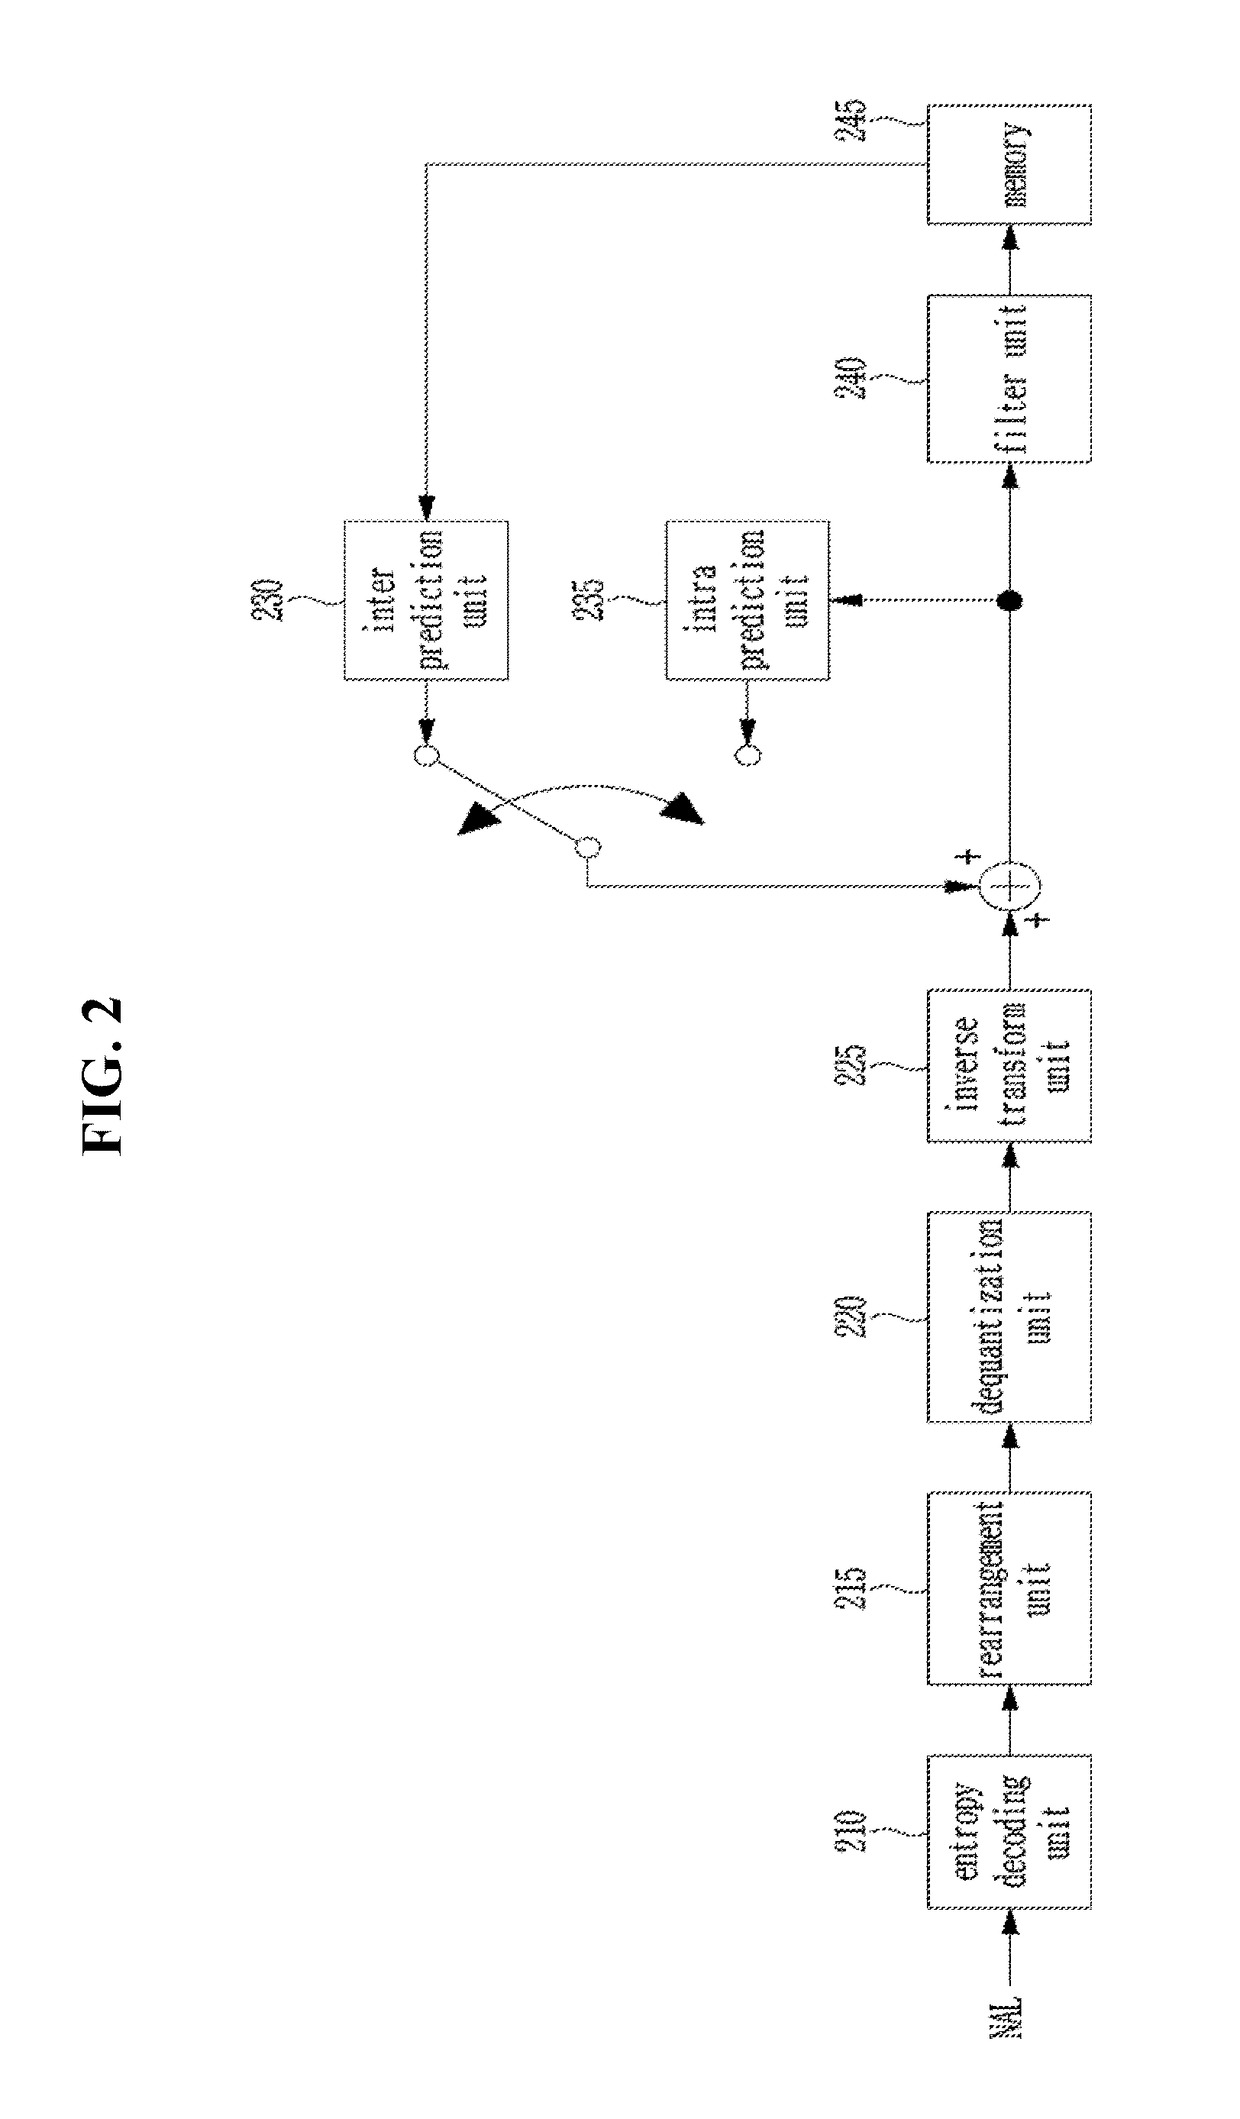 Method and apparatus for processing video signals